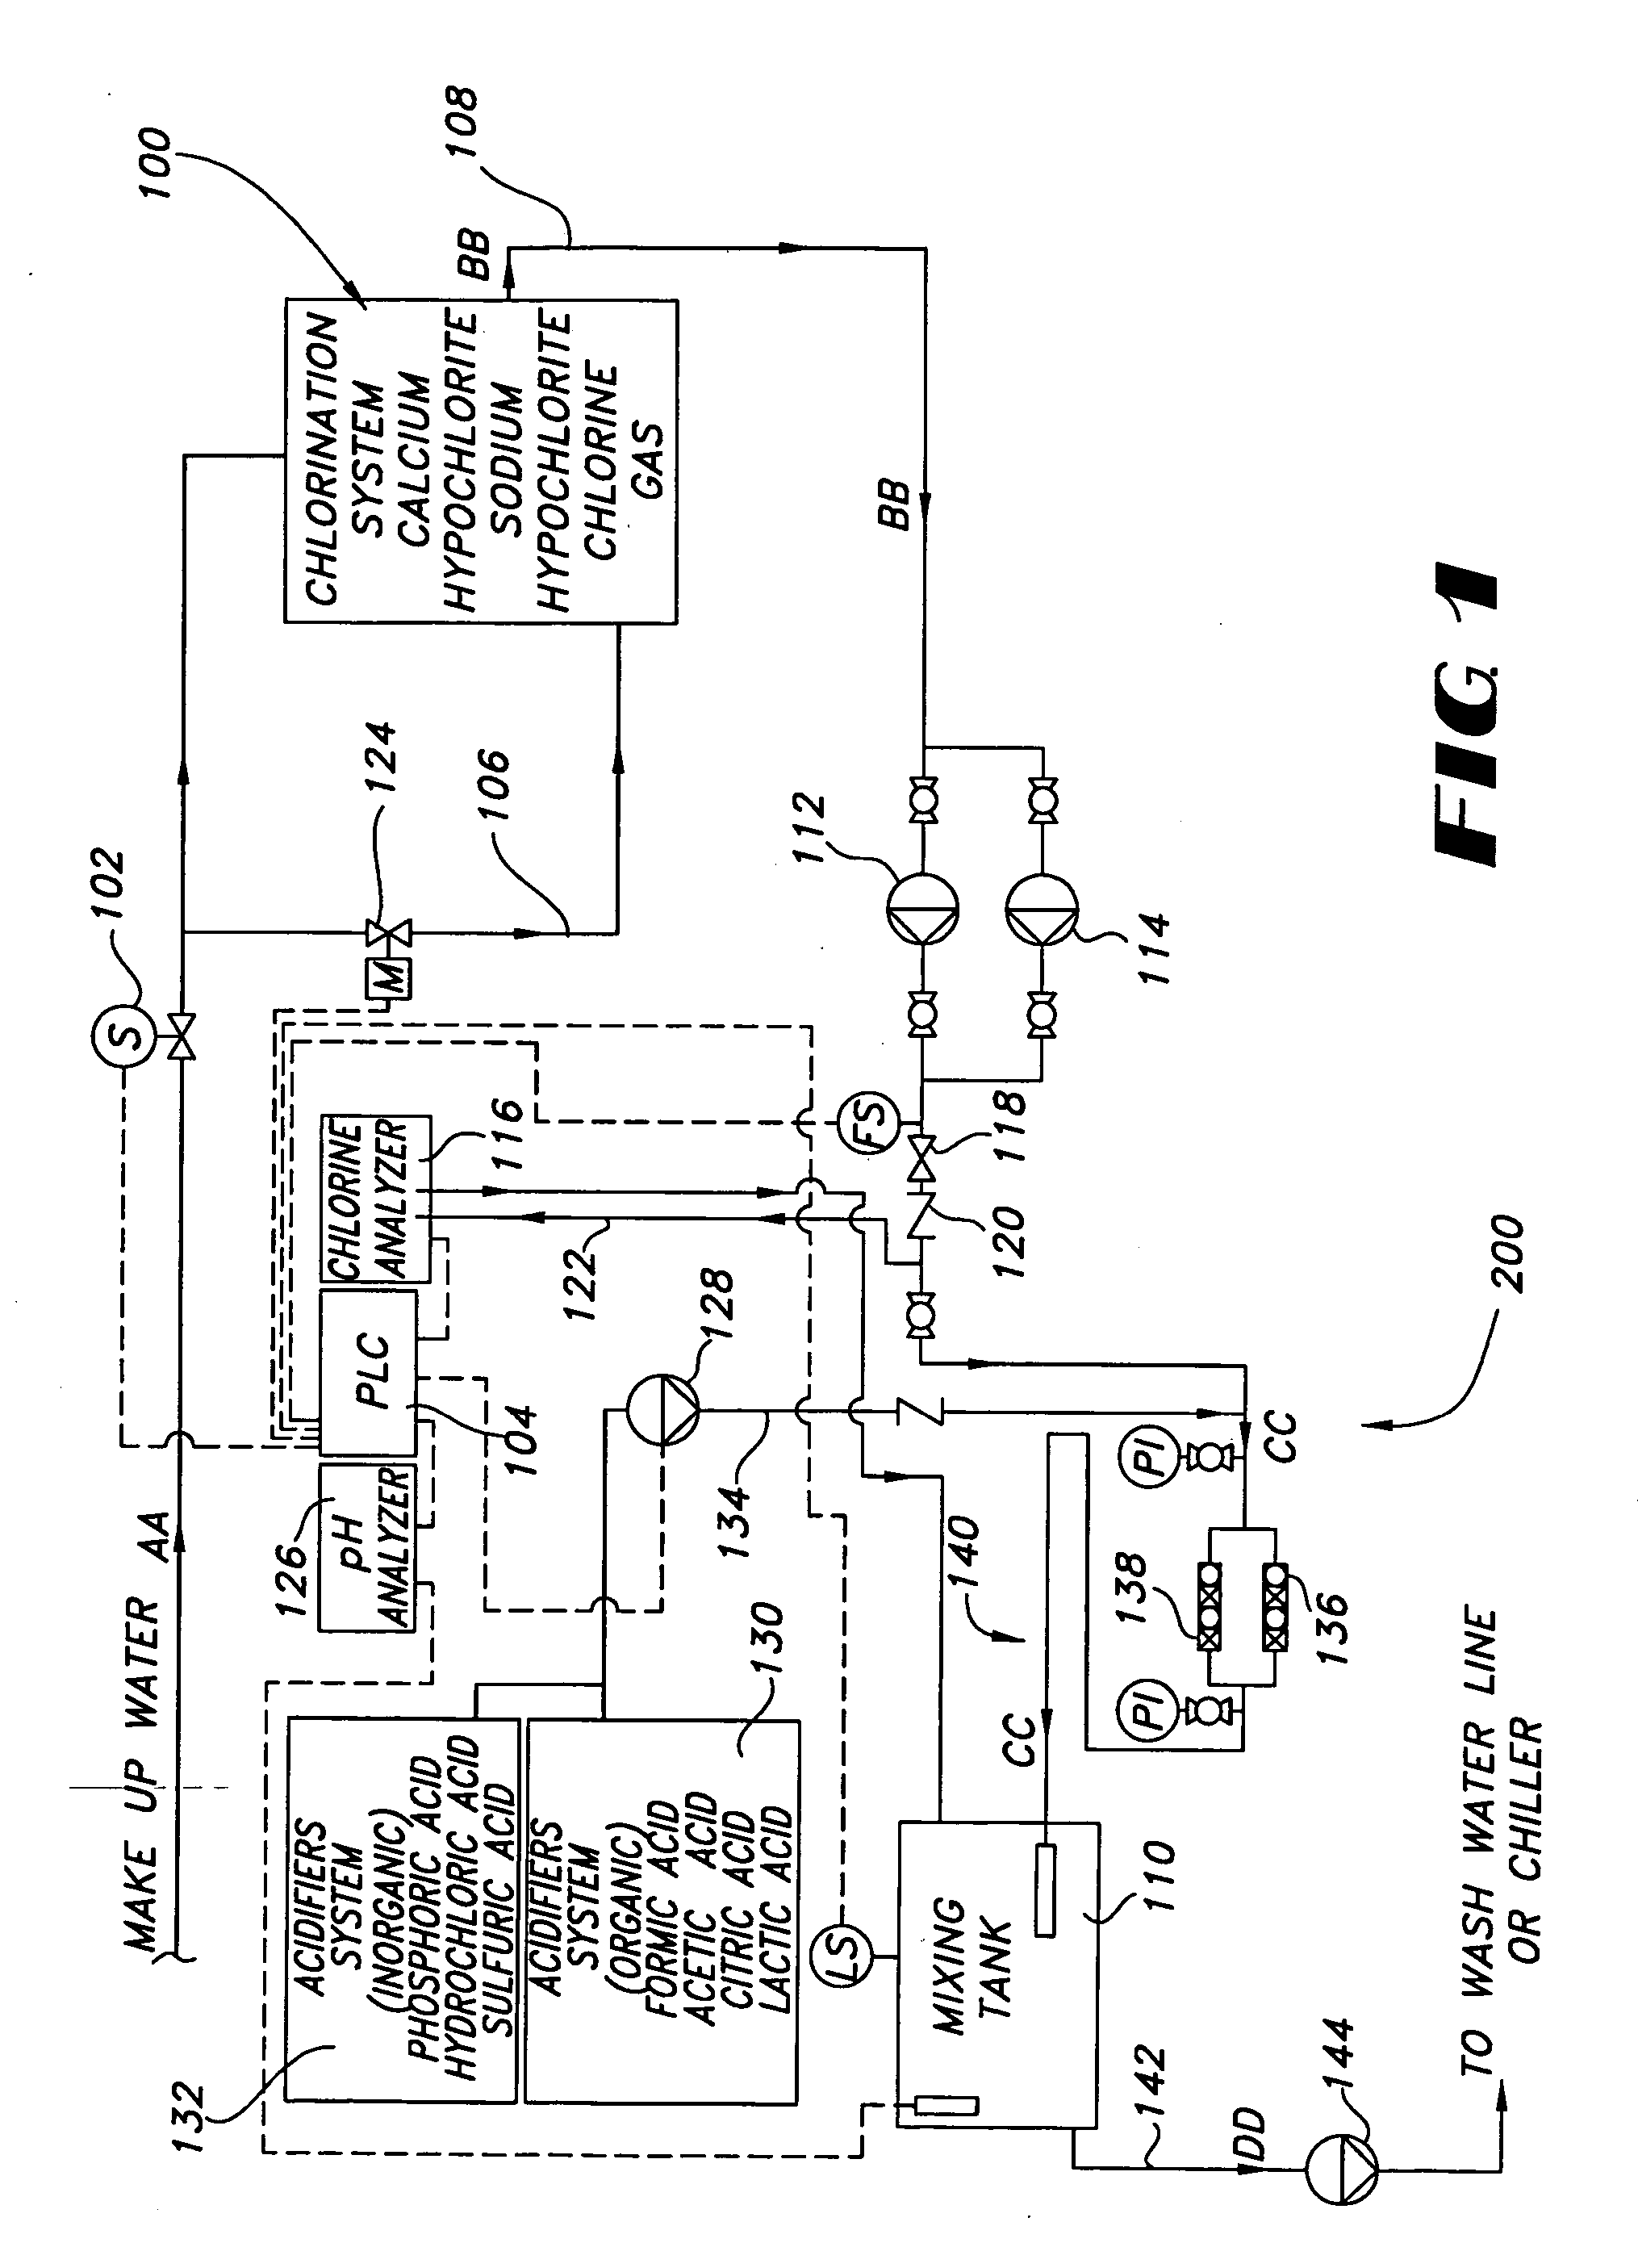 Pressurized solution feed system for introducing hypochlorous acid to a fluid stream